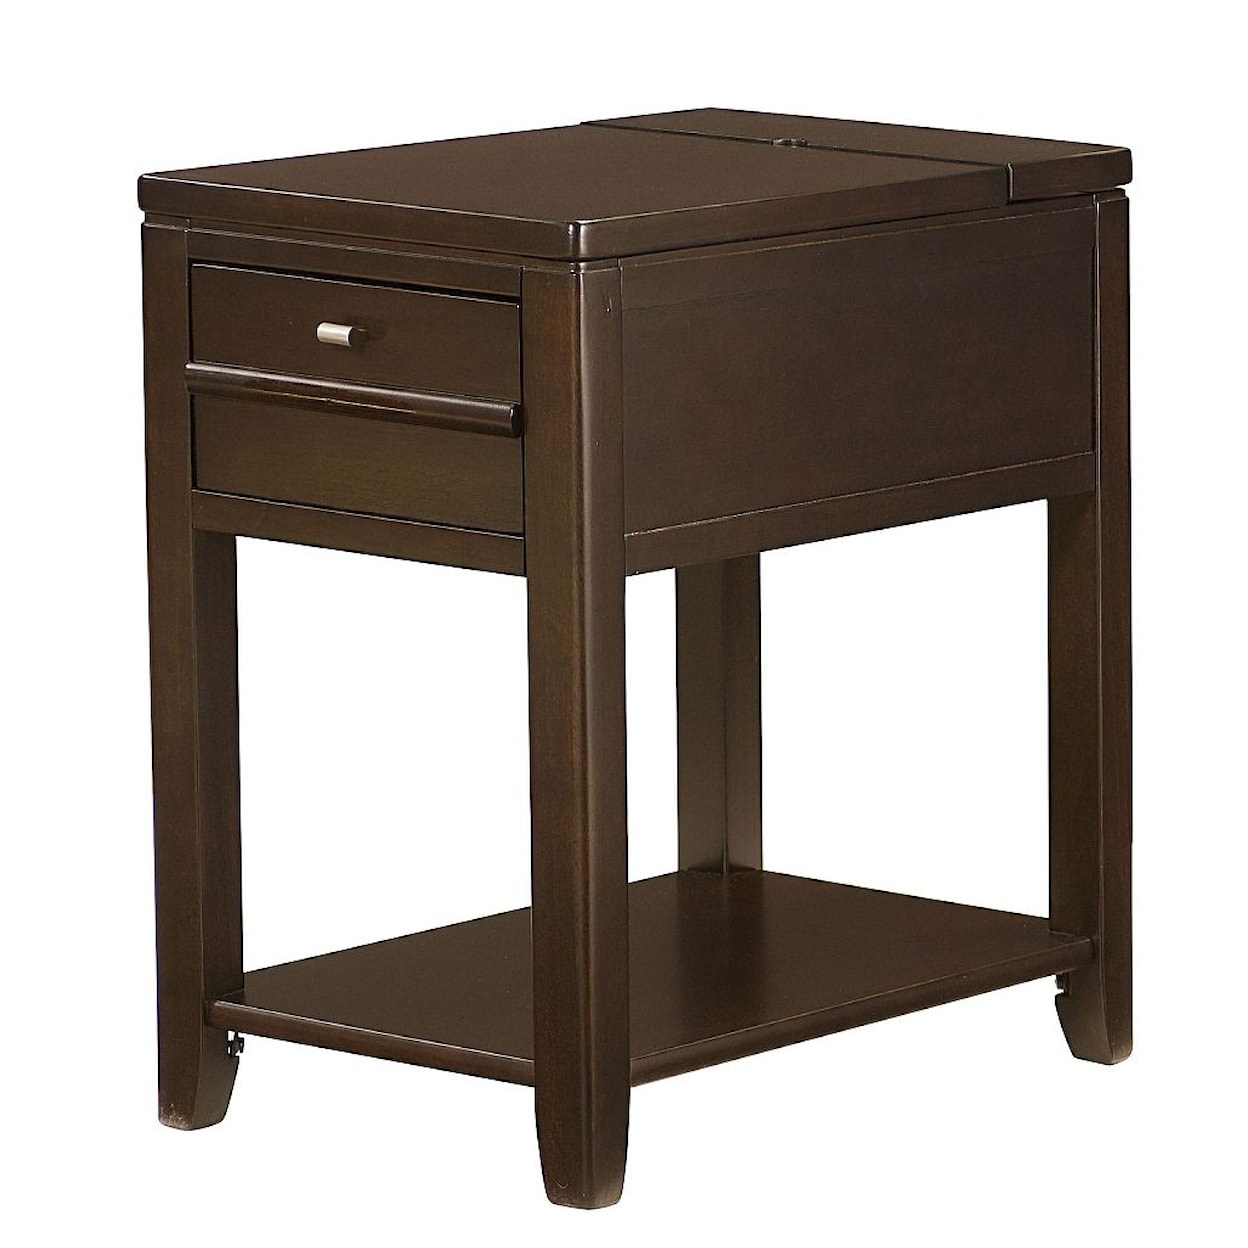 Hammary Chairsides Downtown Chairside Table